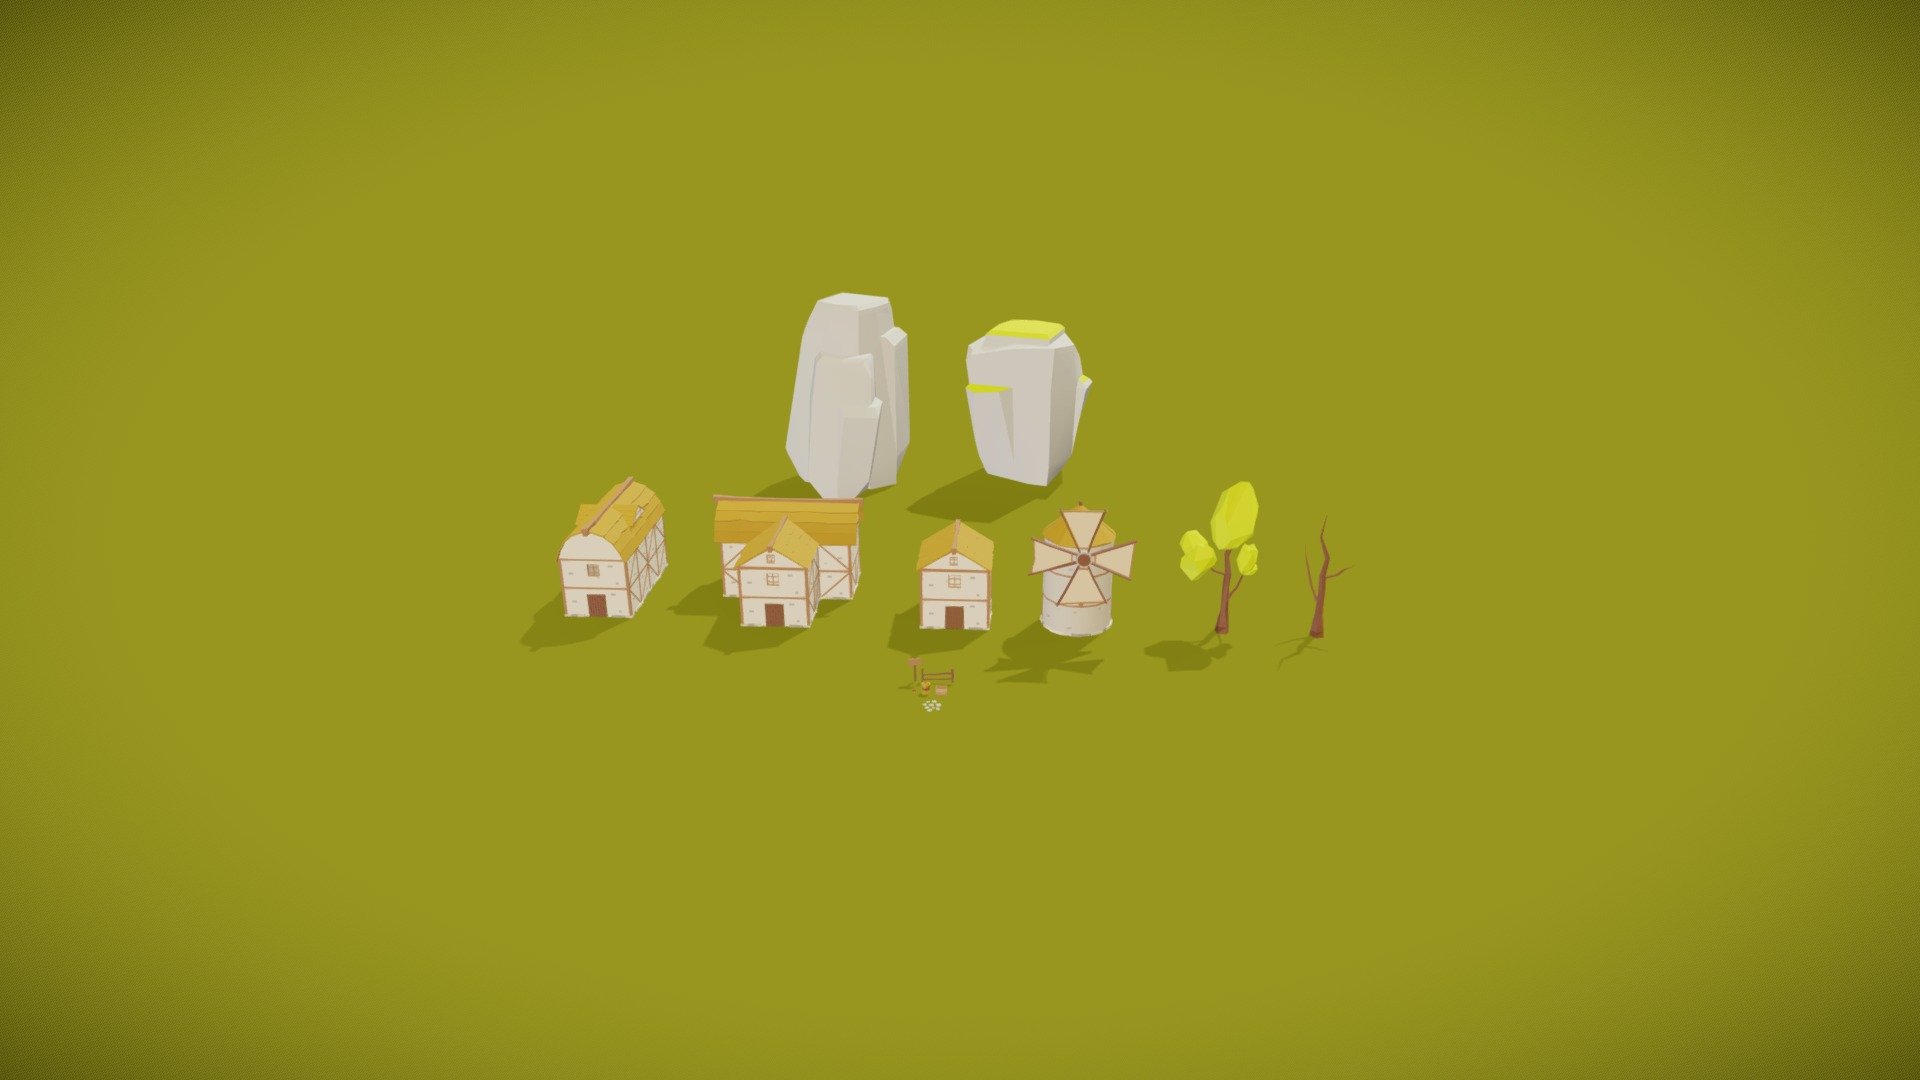 A small gesture for those who love to make games and those who are new to game making. Download and take the first steps to build your sweet little village.

I'm not skilled at level design :( But I designed an example level for you.
https://youtu.be/cAZbarxr5jE - Lowpoly Village Starter Kit - Download Free 3D model by Aramis Games (@aramisgames) 3d model